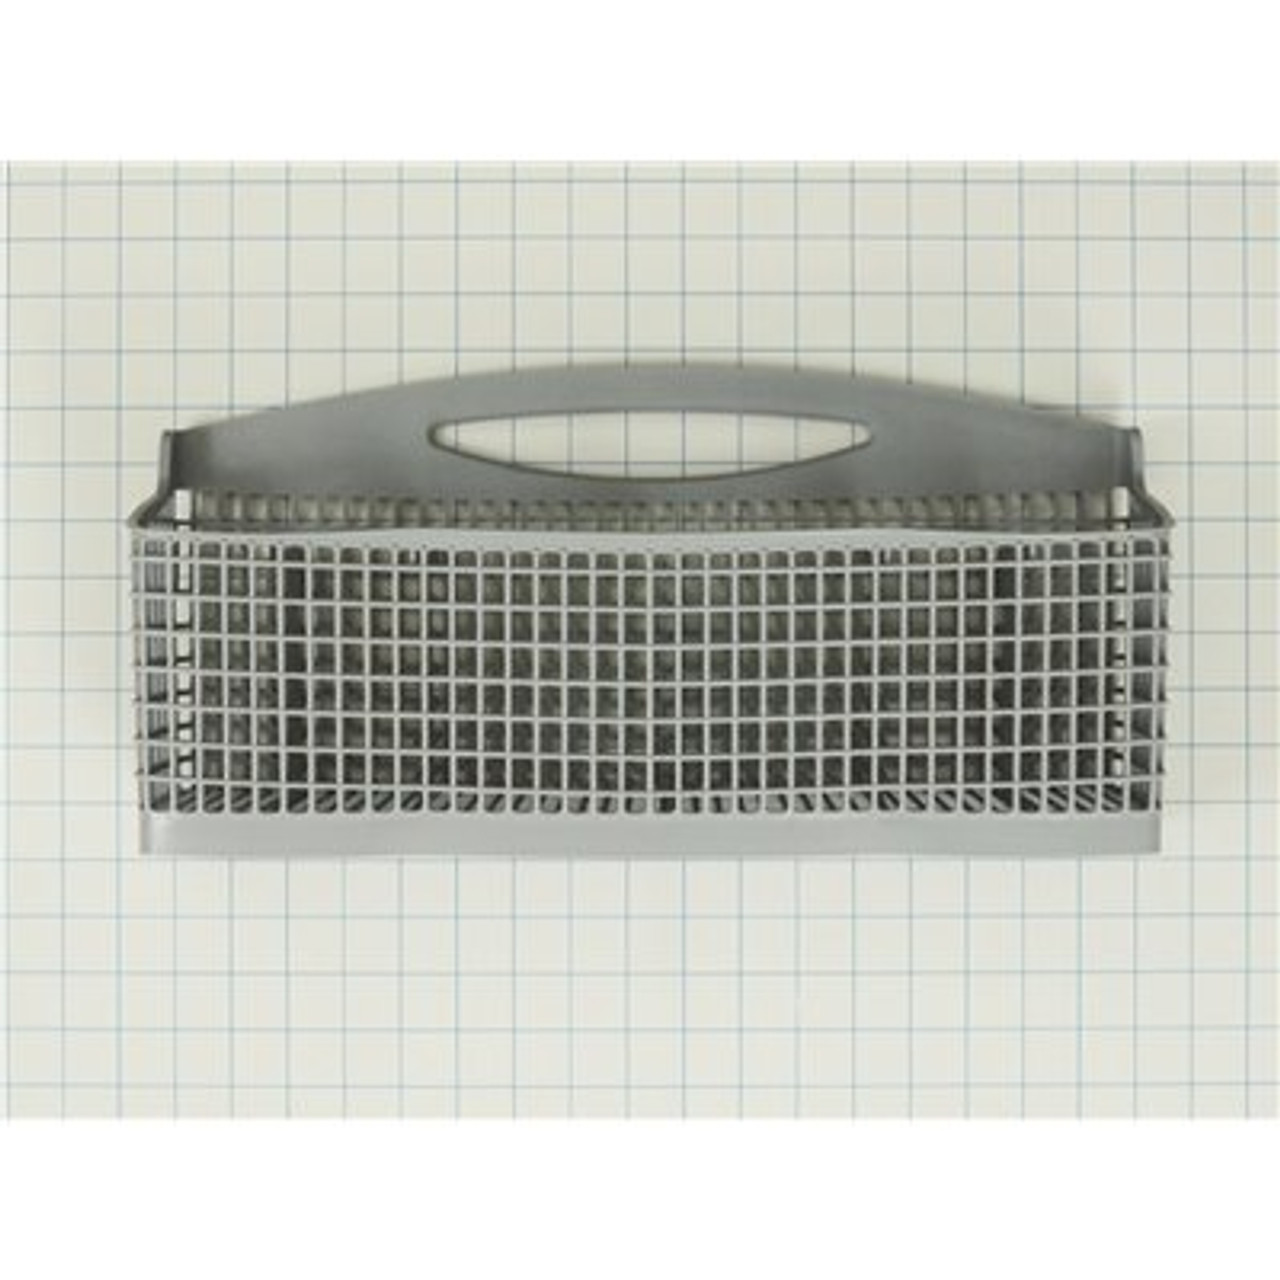 ELECTROLUX Replacement Silverware Basket For Dishwasher, Part #5304506523